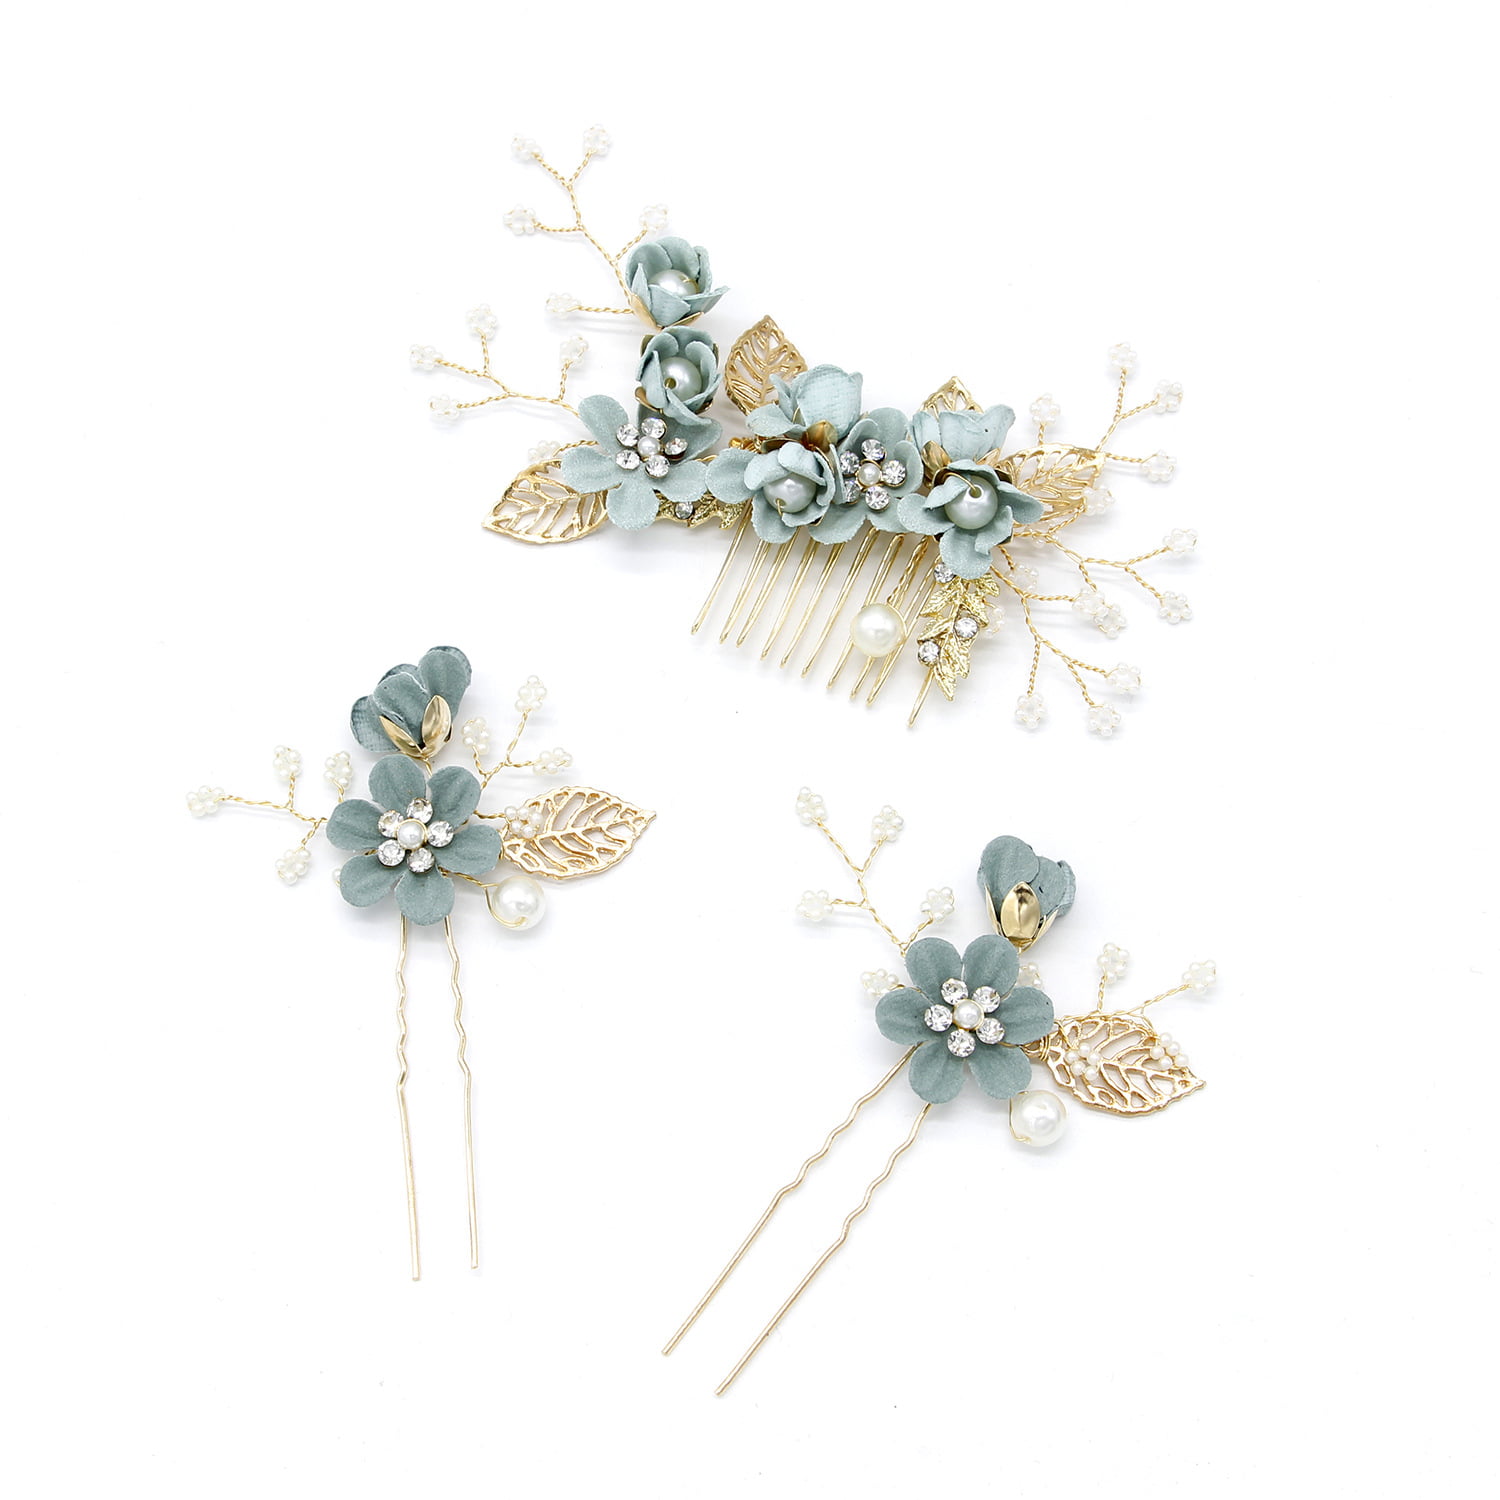 3PCS Flower Bride Hair Comb Alloy Hair Jewelry Headpieces Pearl Side Combs  Bridal Decorative Hair Accessories New | Walmart Canada